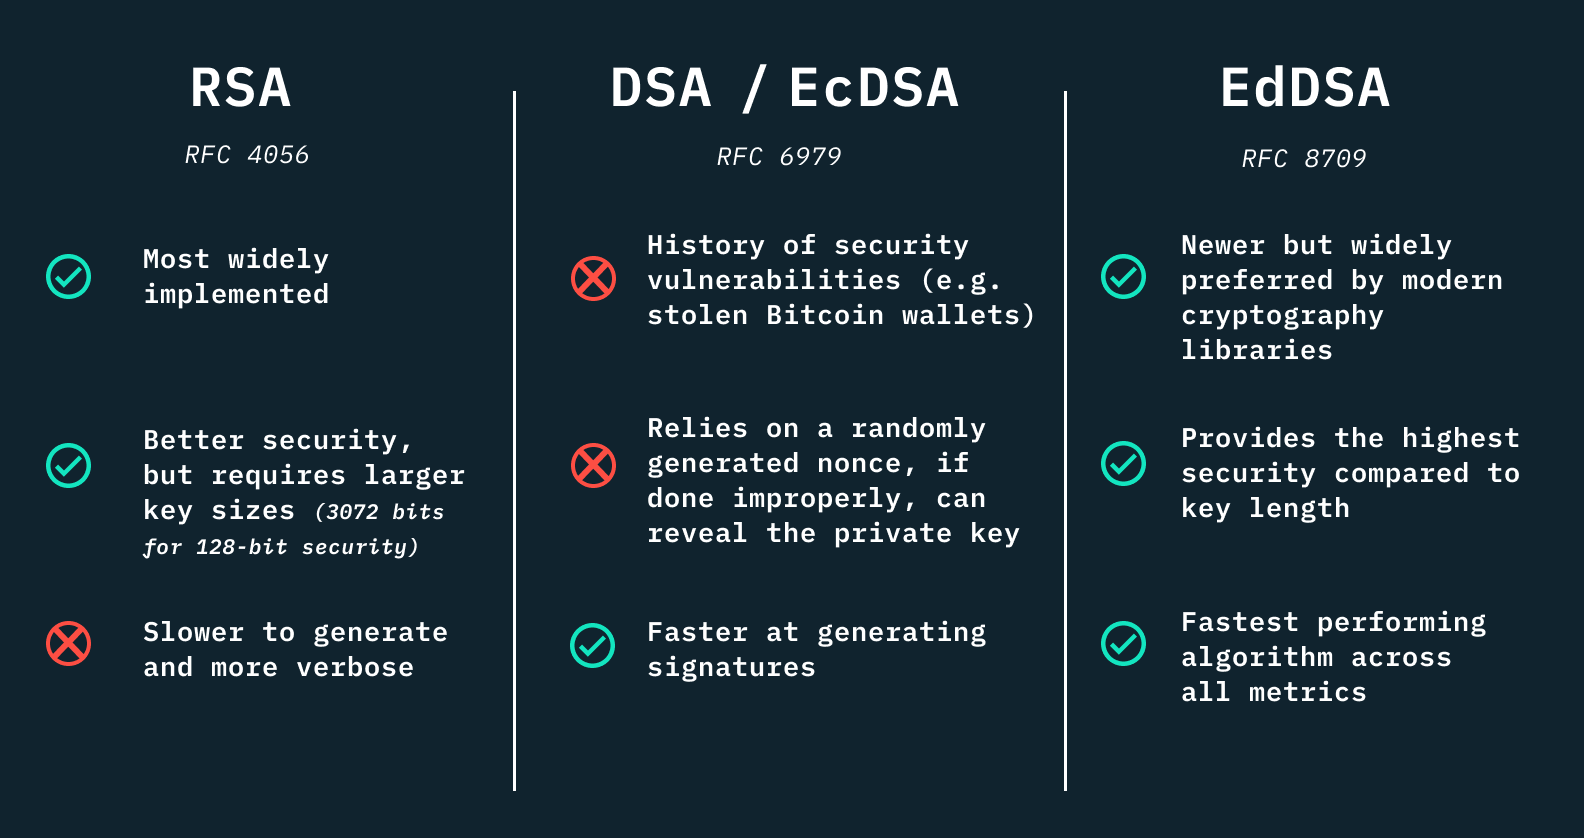 A chart comparing three hashing algorithms: RSA, DSA/EcDSA, and EdDSA, showing EdDSA to be the most preferable and secure